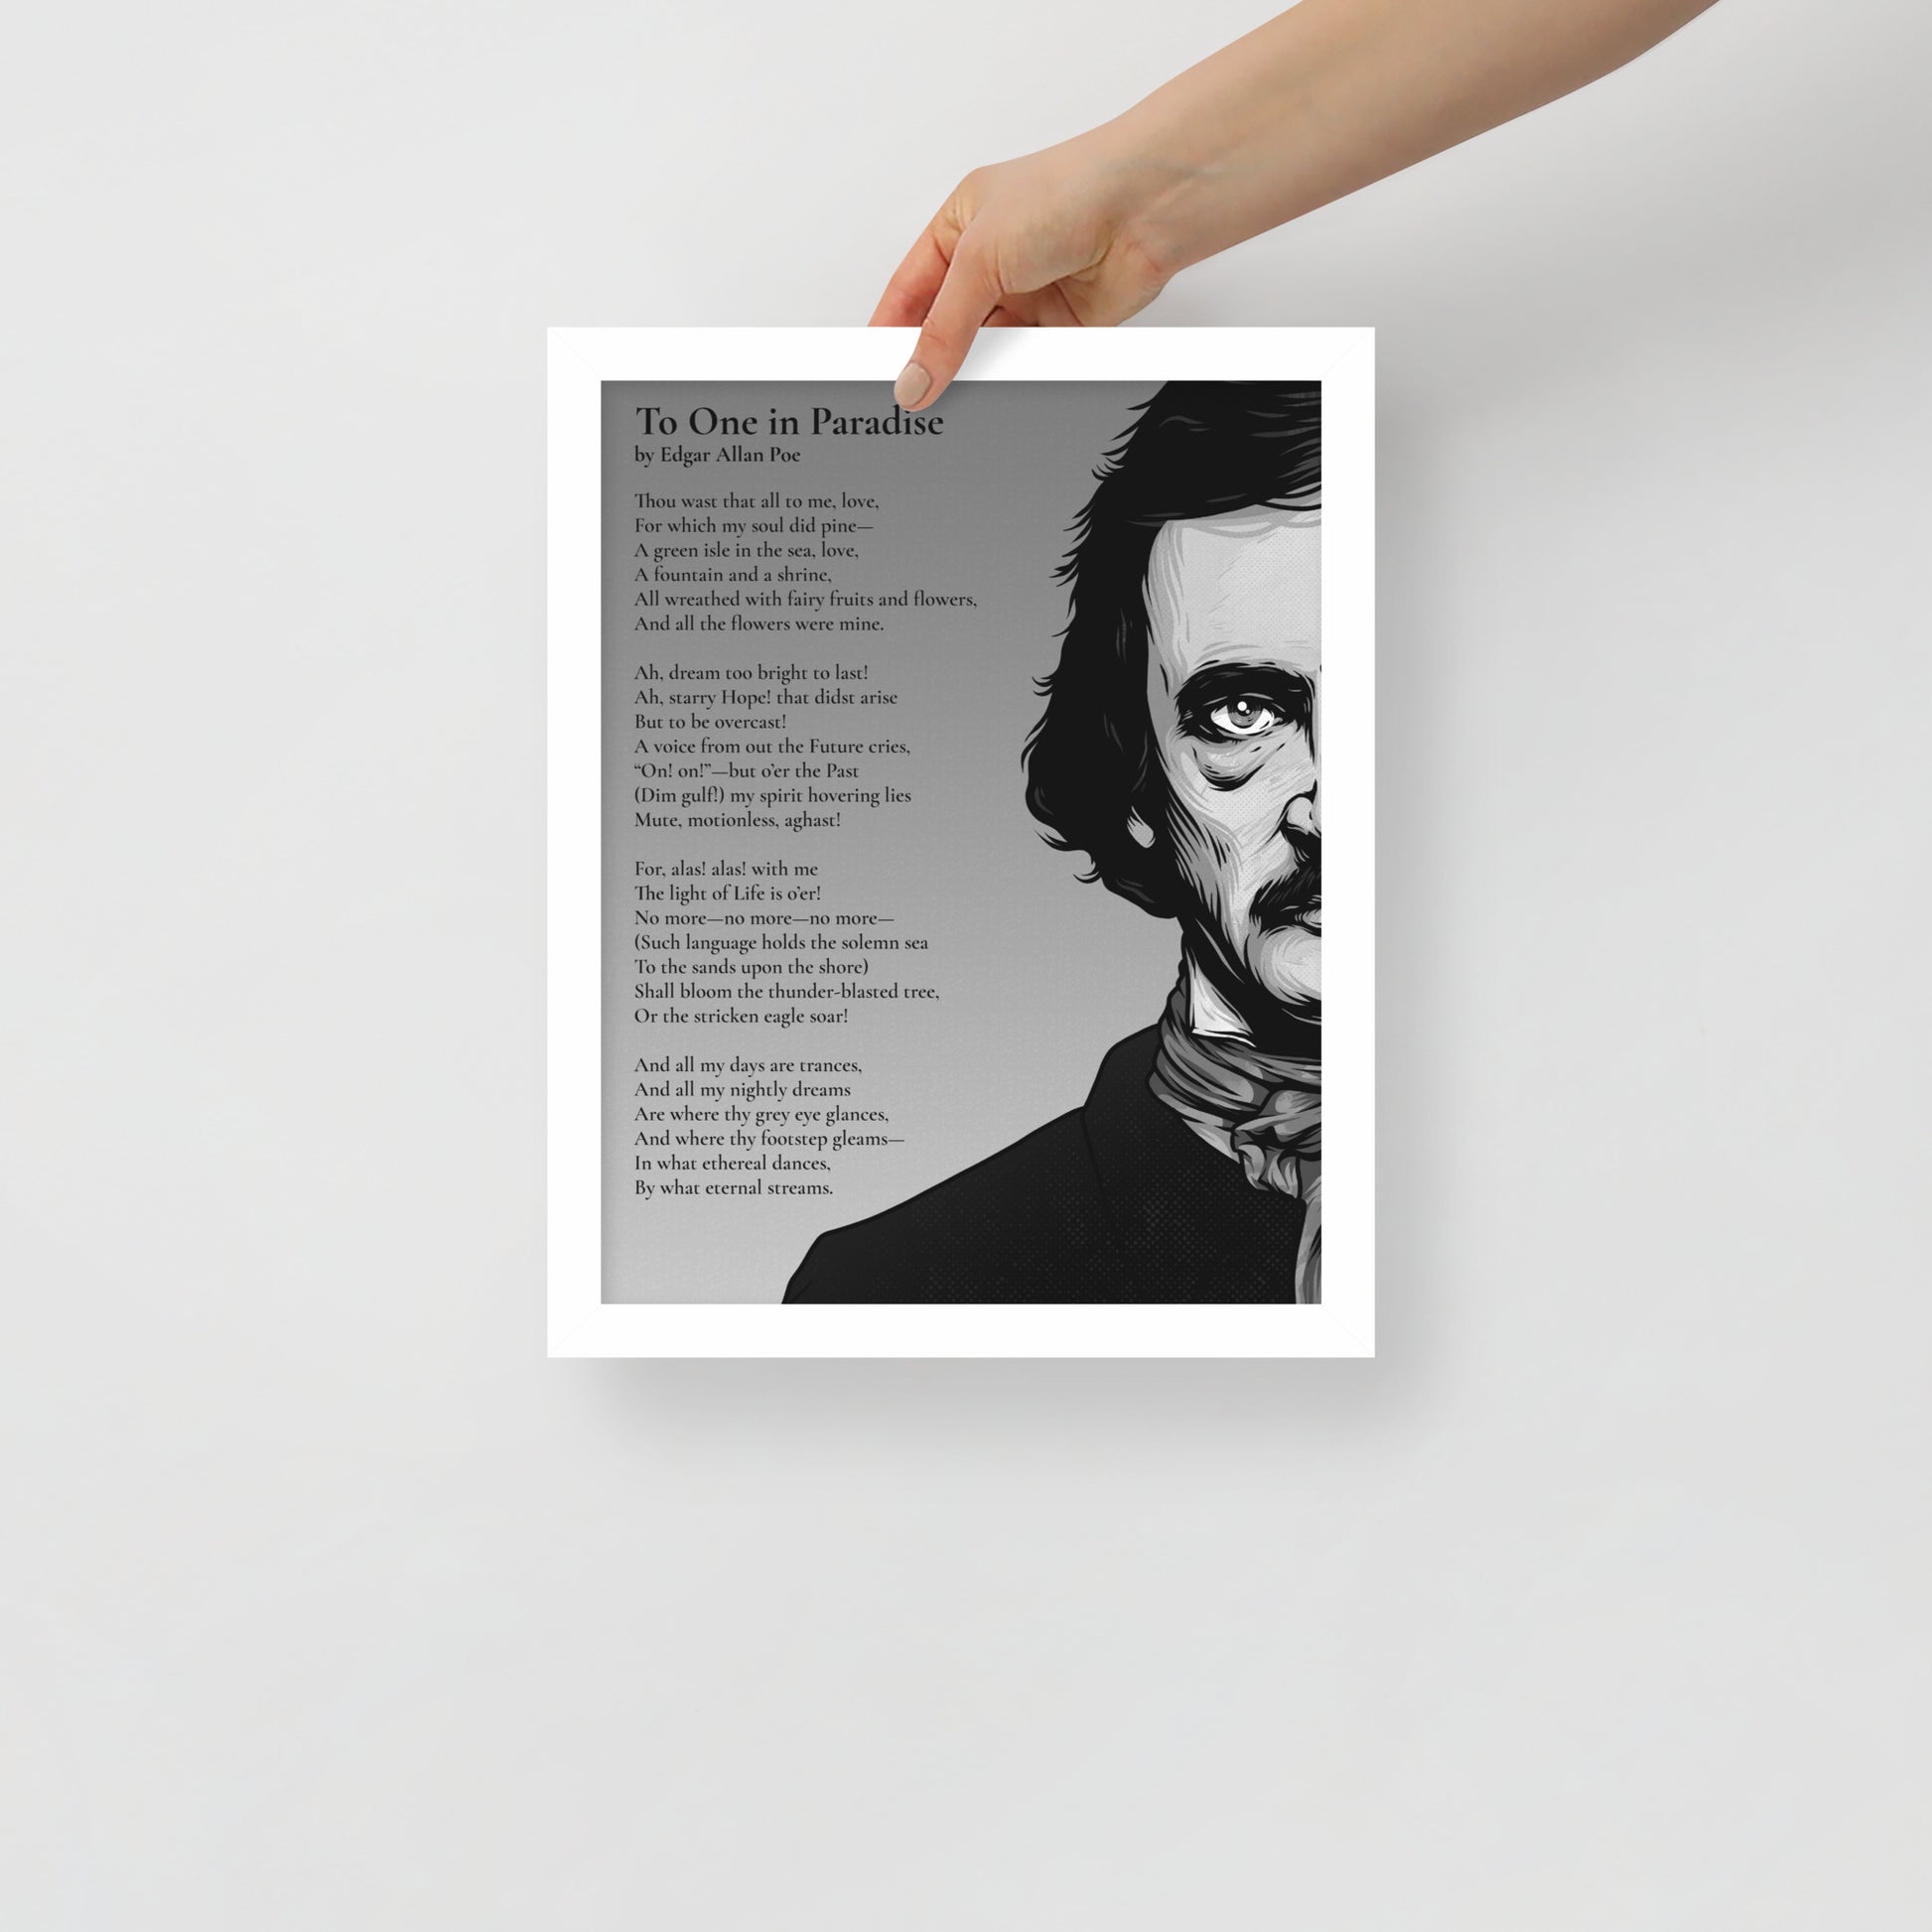 Edgar Allan Poe's 'To One in Paradise' Framed Matted Poster - 11 x 14 White Frame